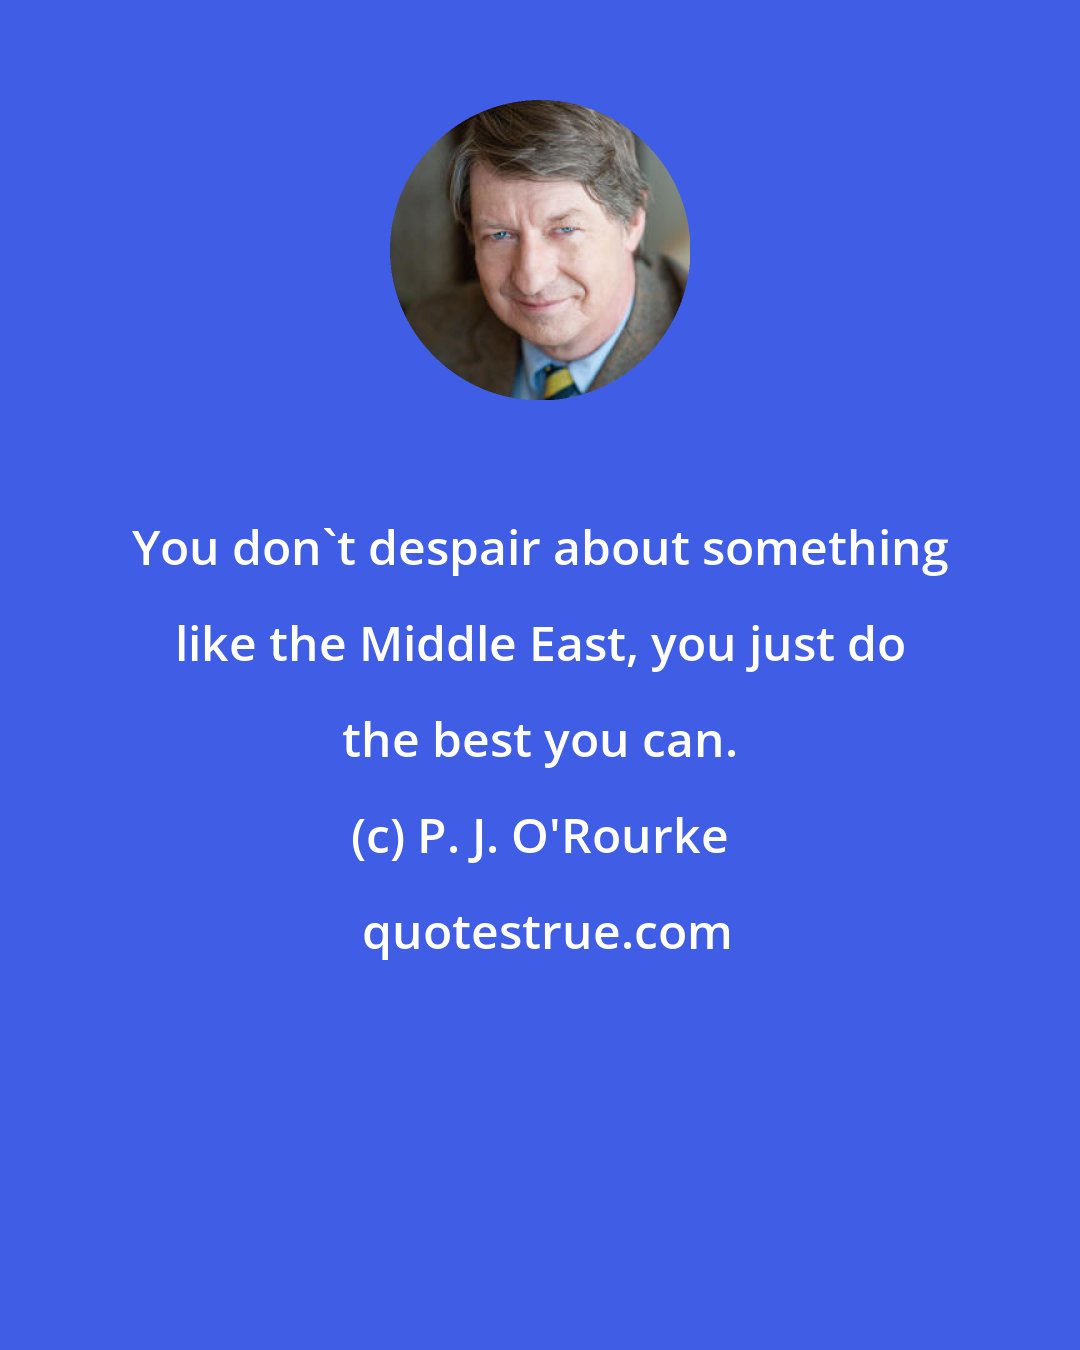 P. J. O'Rourke: You don't despair about something like the Middle East, you just do the best you can.